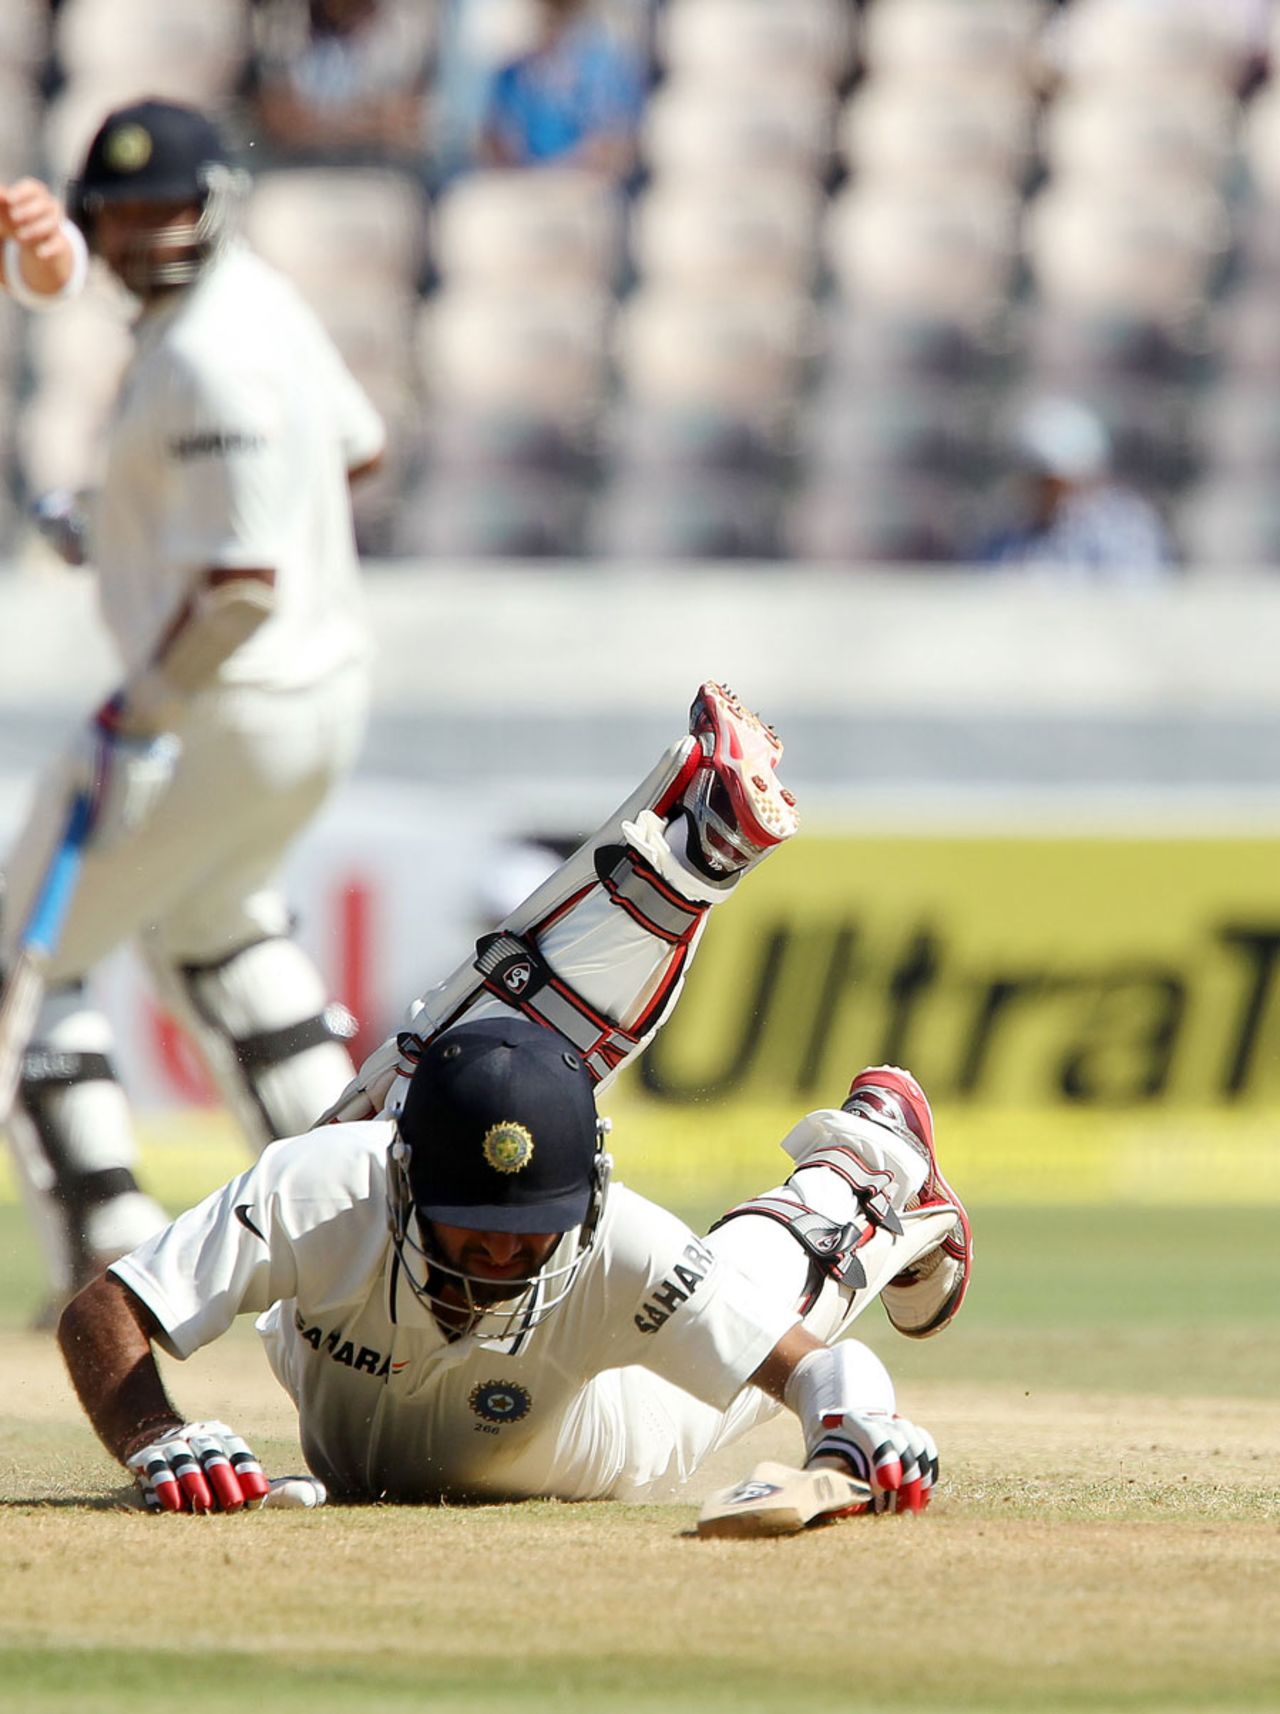 Cheteshwar Pujara hurt his knee while diving to make his ground, India v Australia, 2nd Test, Hyderabad, 2nd day, March 3, 2013